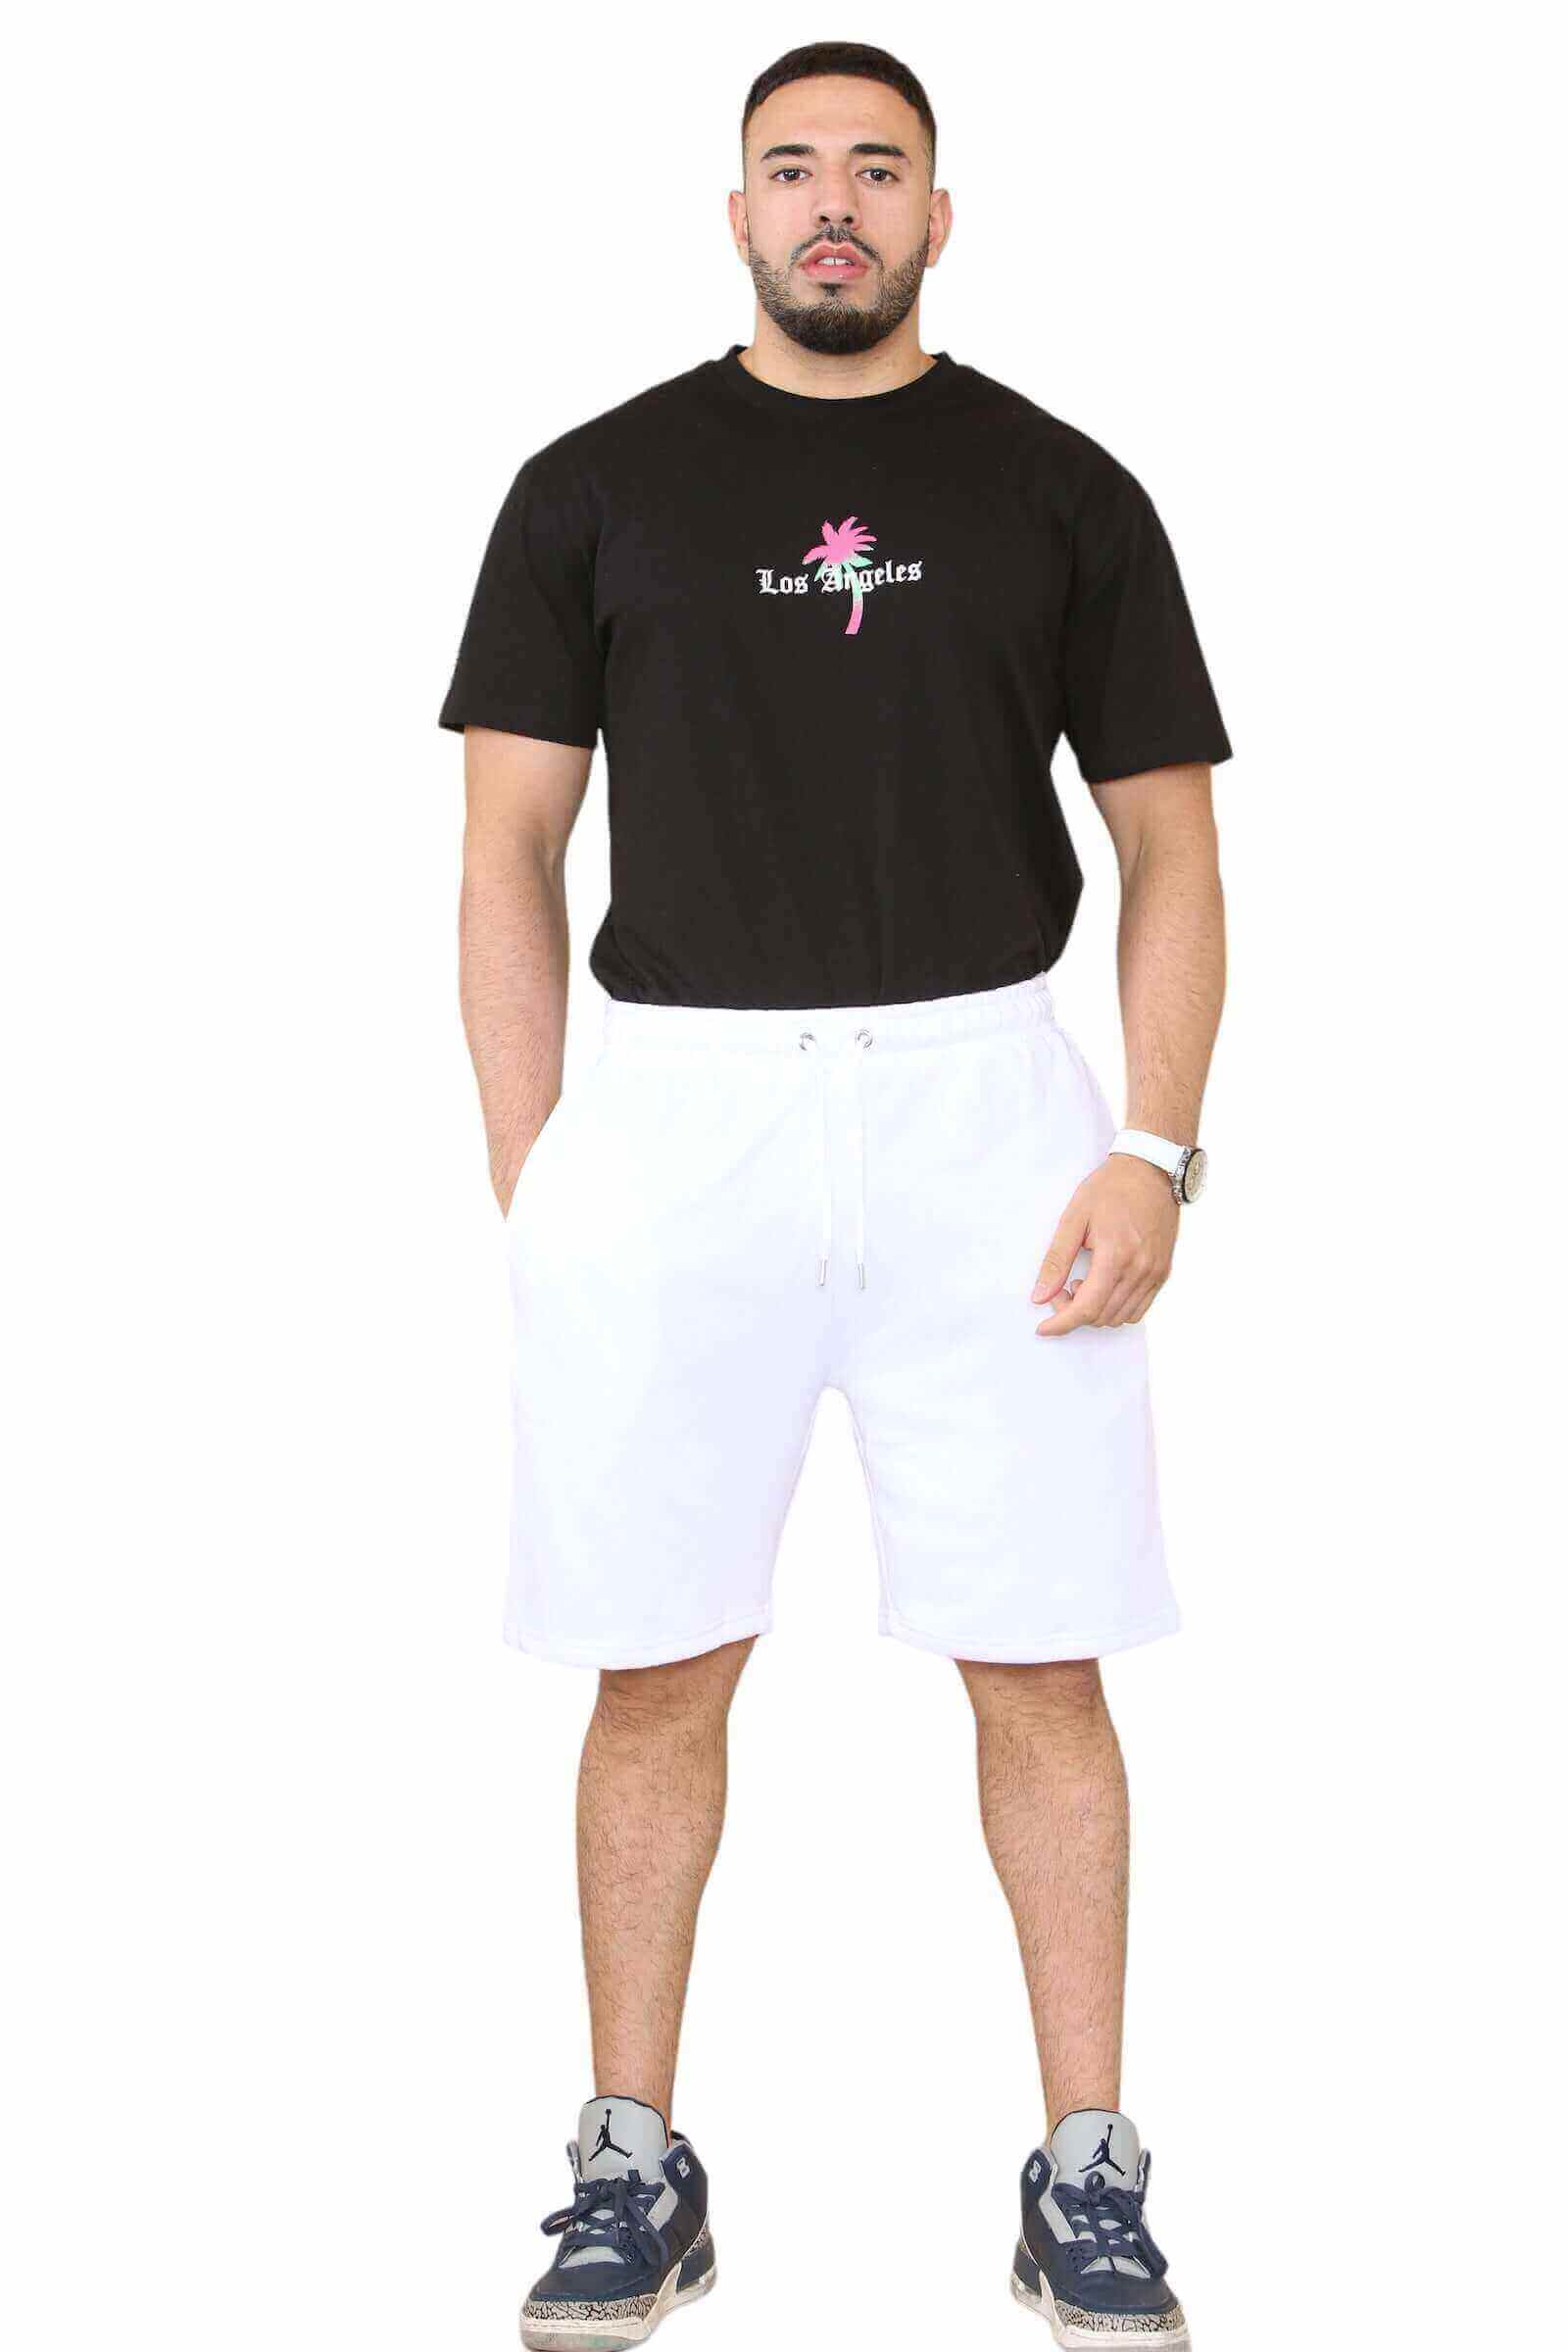 Front View of Men's Gym Shorts in White for Your Active Lifestyle